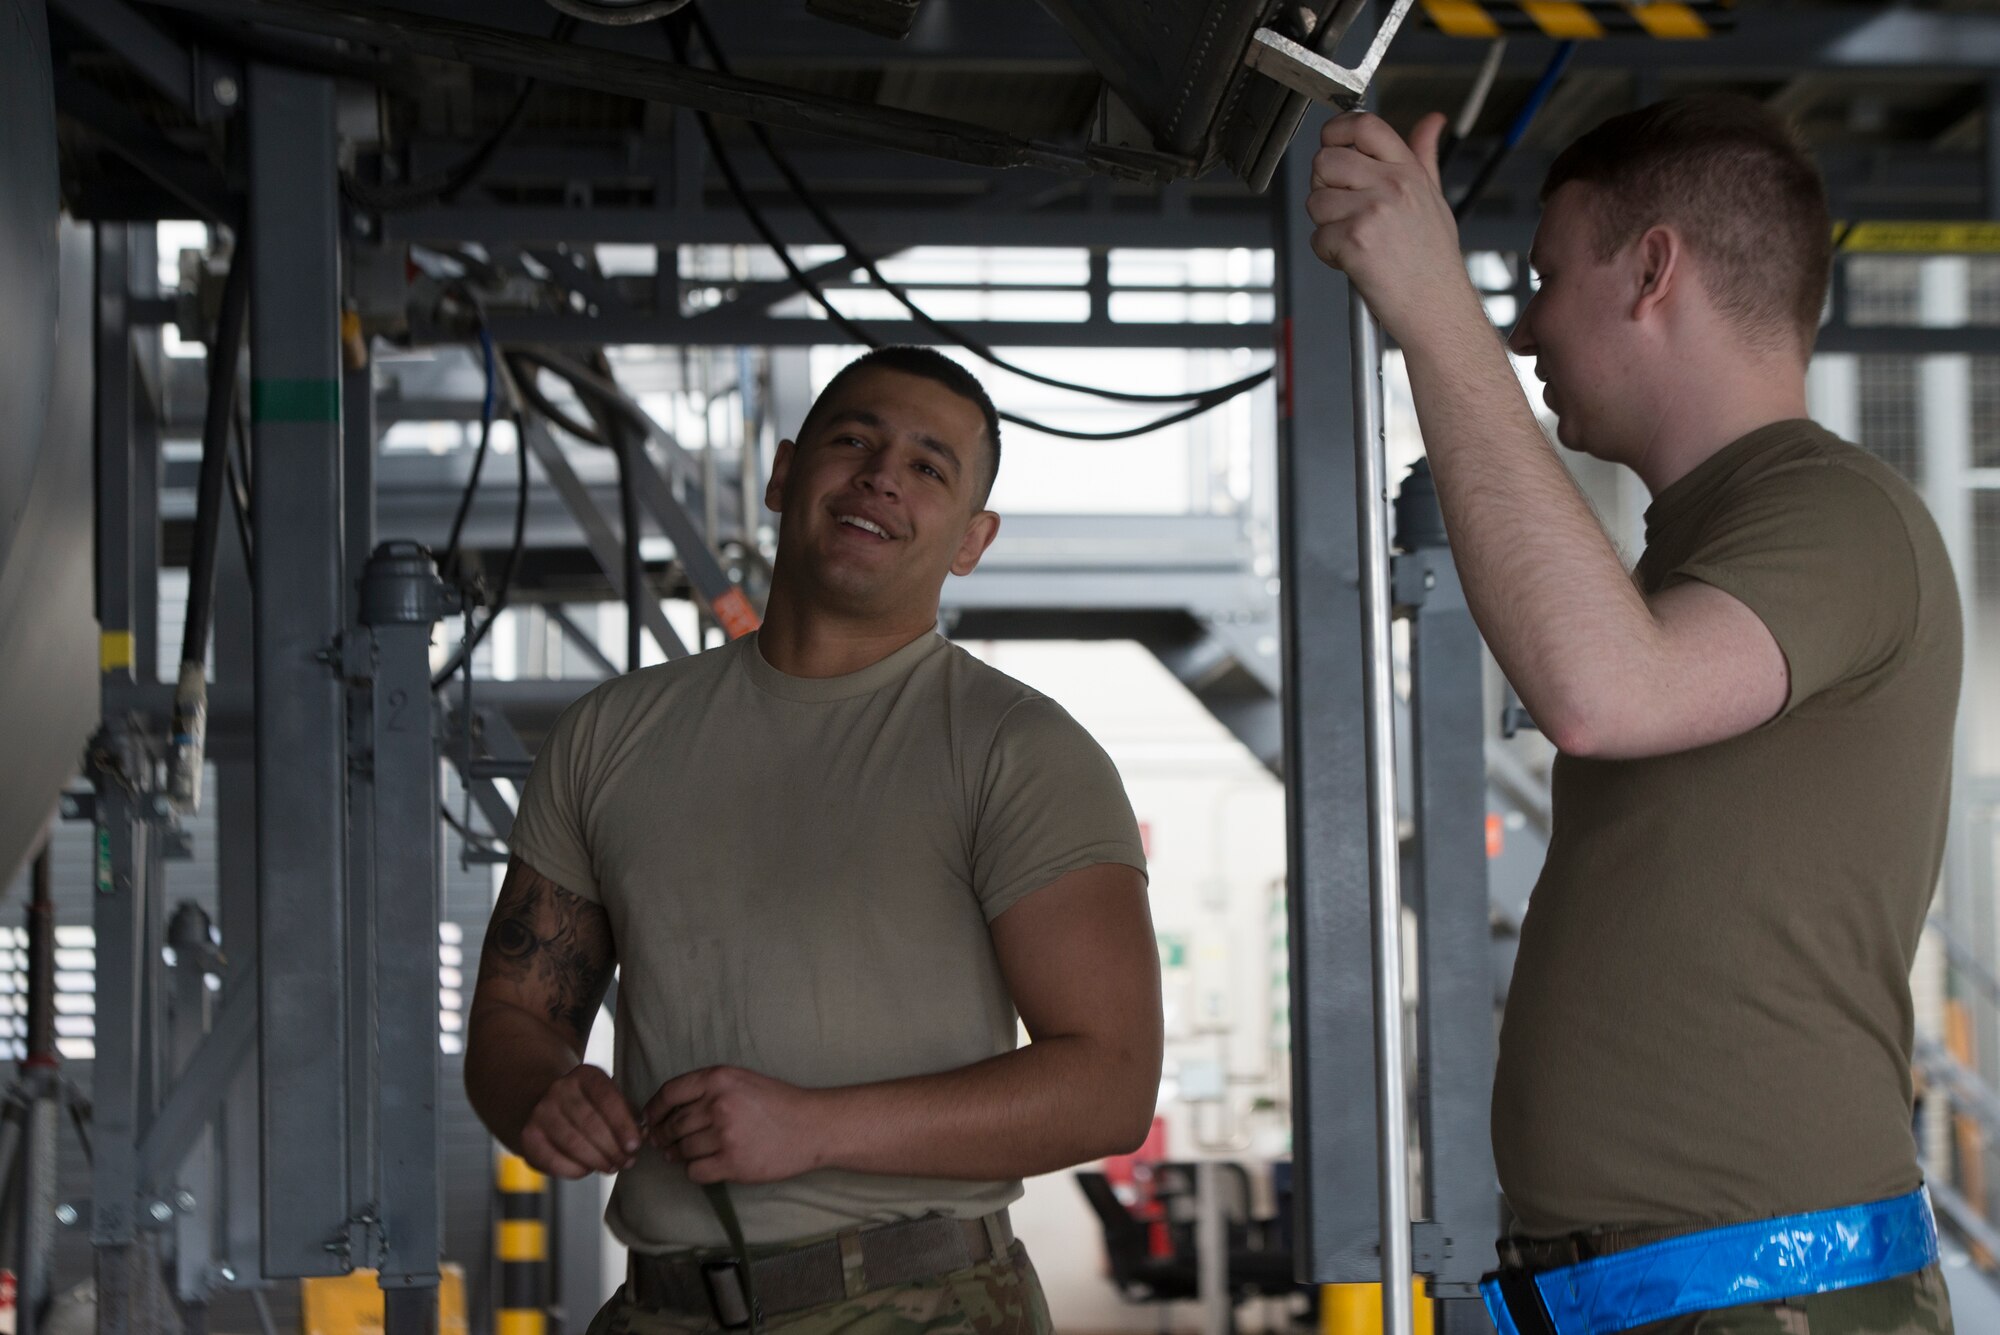 U.S. Air Force Staff Sgt. Chandler Bitterman, 86th Aircraft Maintenance Squadron dedicated crew chief, left, and Staff Sgt. Paul Michael, 86th Maintenance Squadron repair and reclamation craftsman, talk while working at Ramstein Air Base, Germany, Feb. 5th, 2020. Maintaining a C-130J Super Hercules aircraft requires the cooperation of various maintenance flights including engine, electrician, arrow repair, and wheel and tire flights. The 86th MXS works around the clock to make sure the base’s C-130’s are maintained and ready to fly at all times.